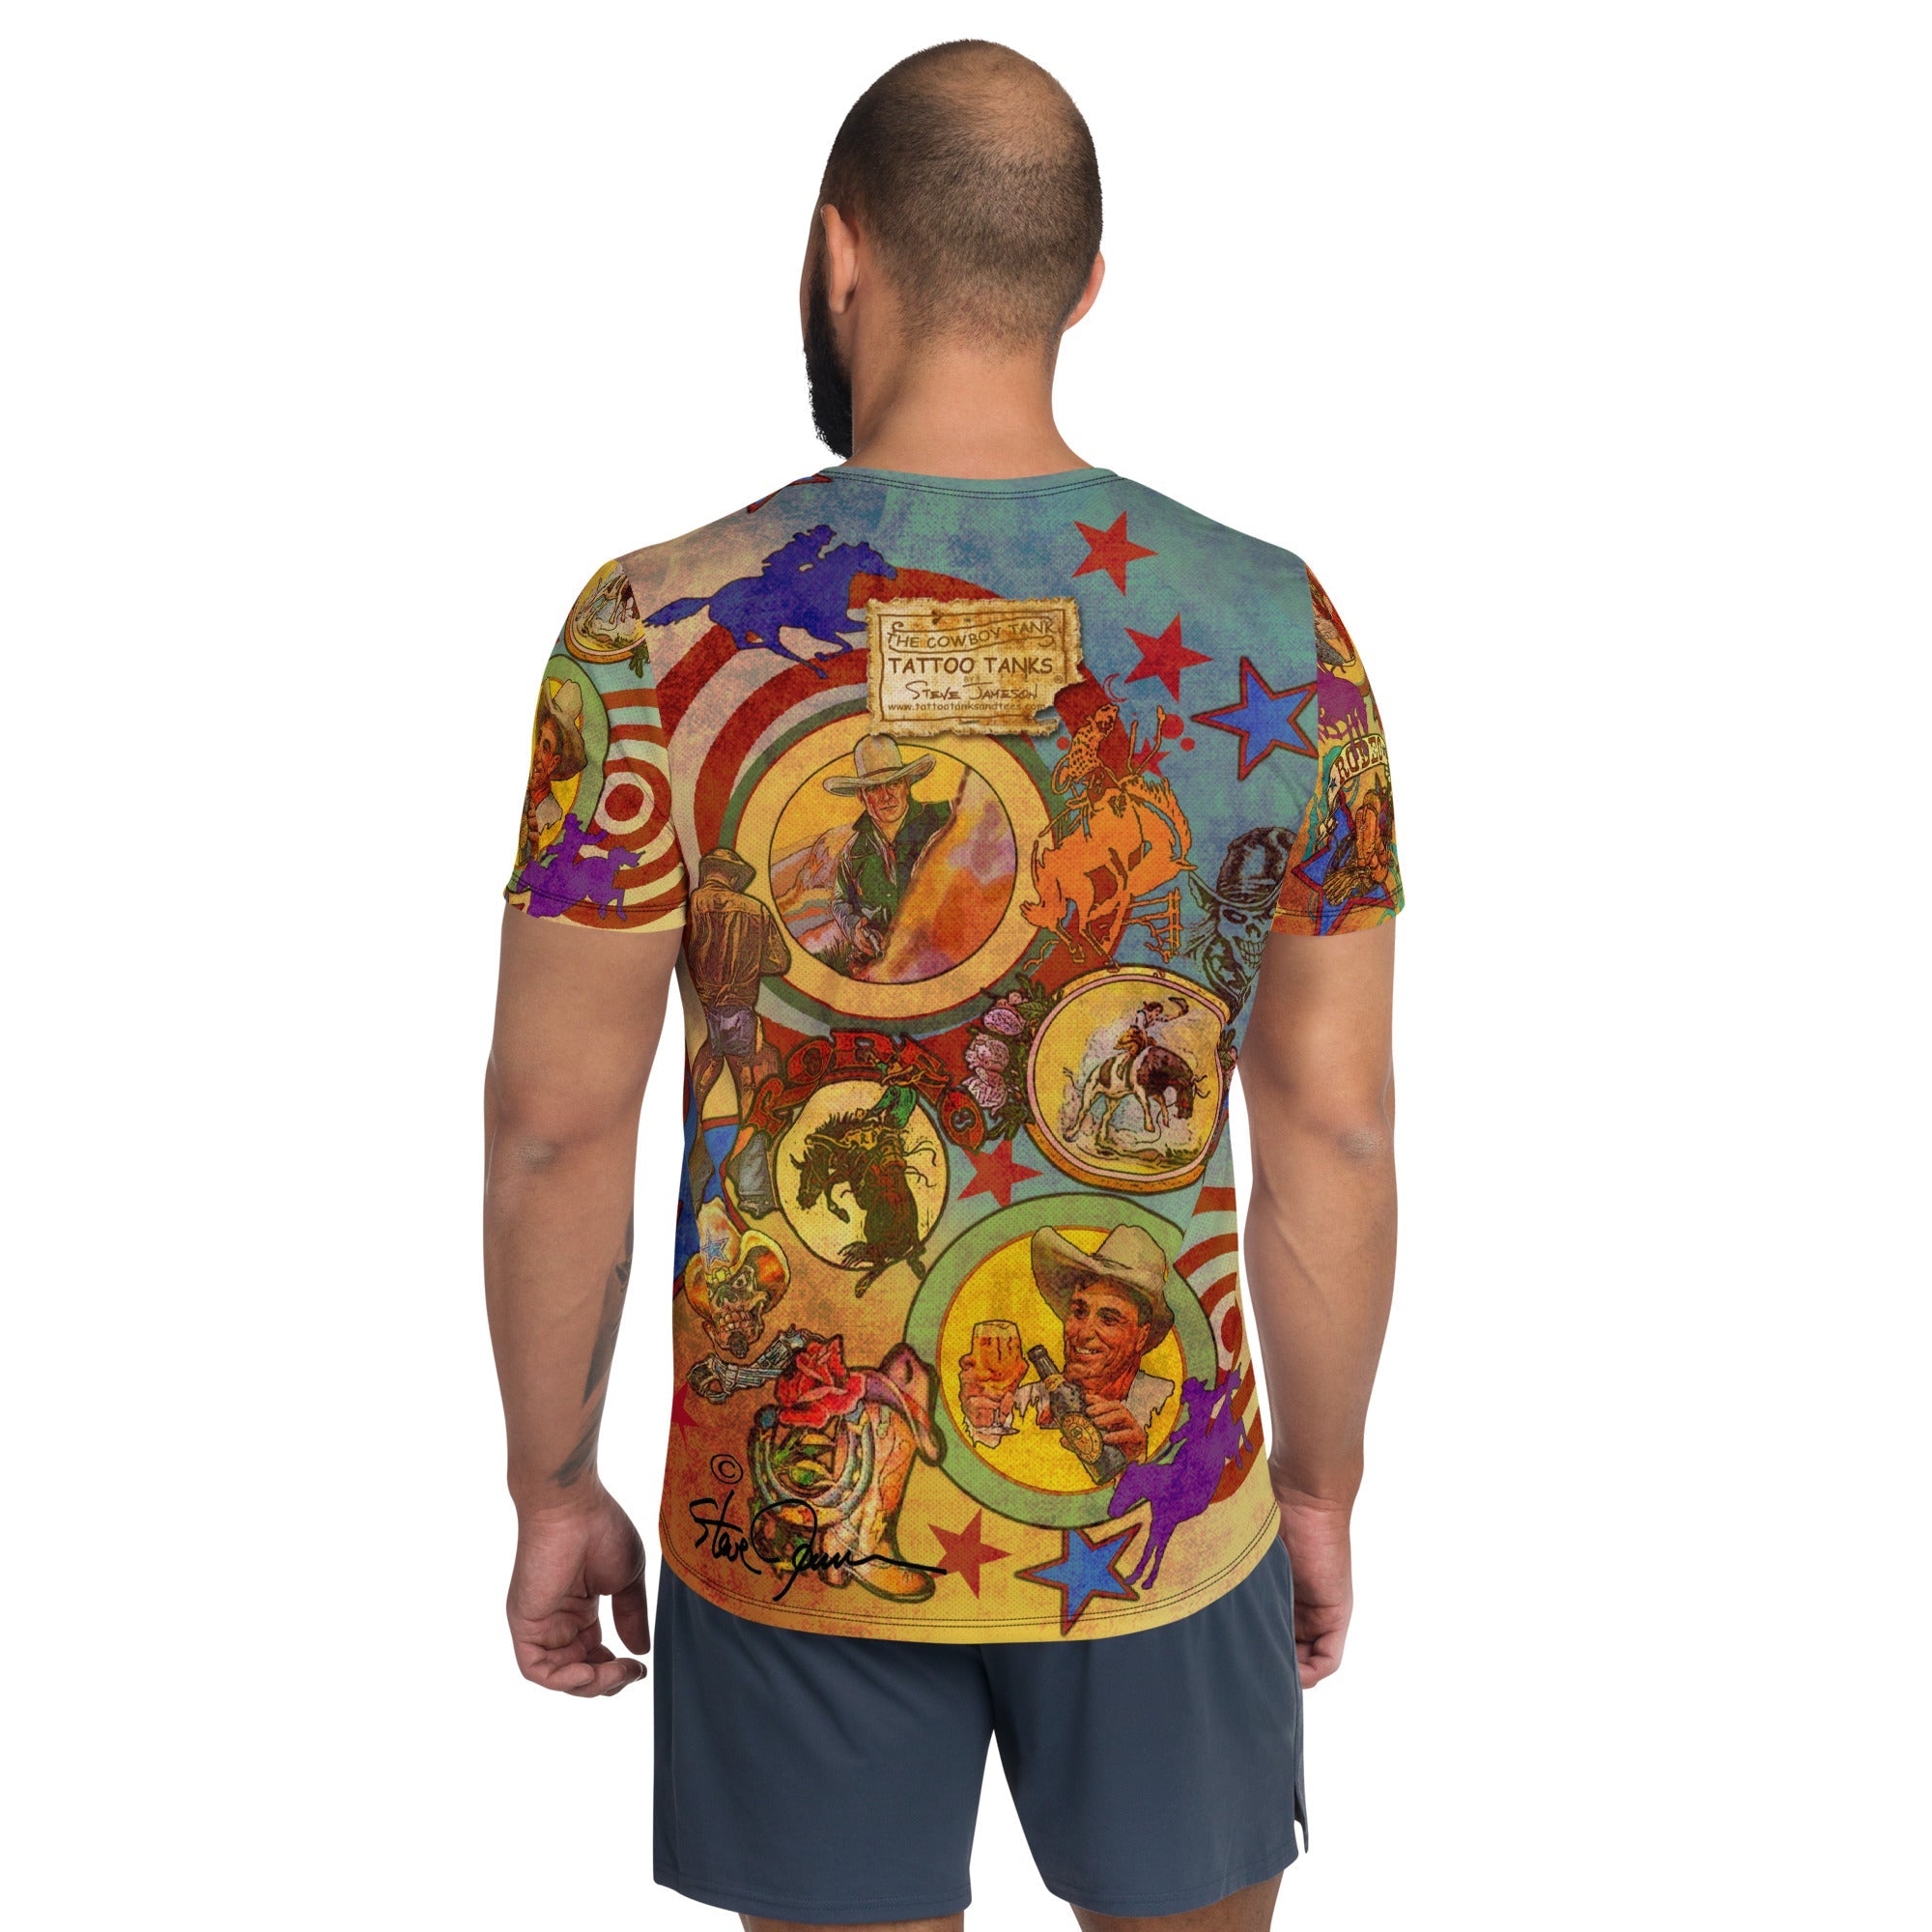 "COWBOY TATTOO" ATHLETIC TEE FOR MEN